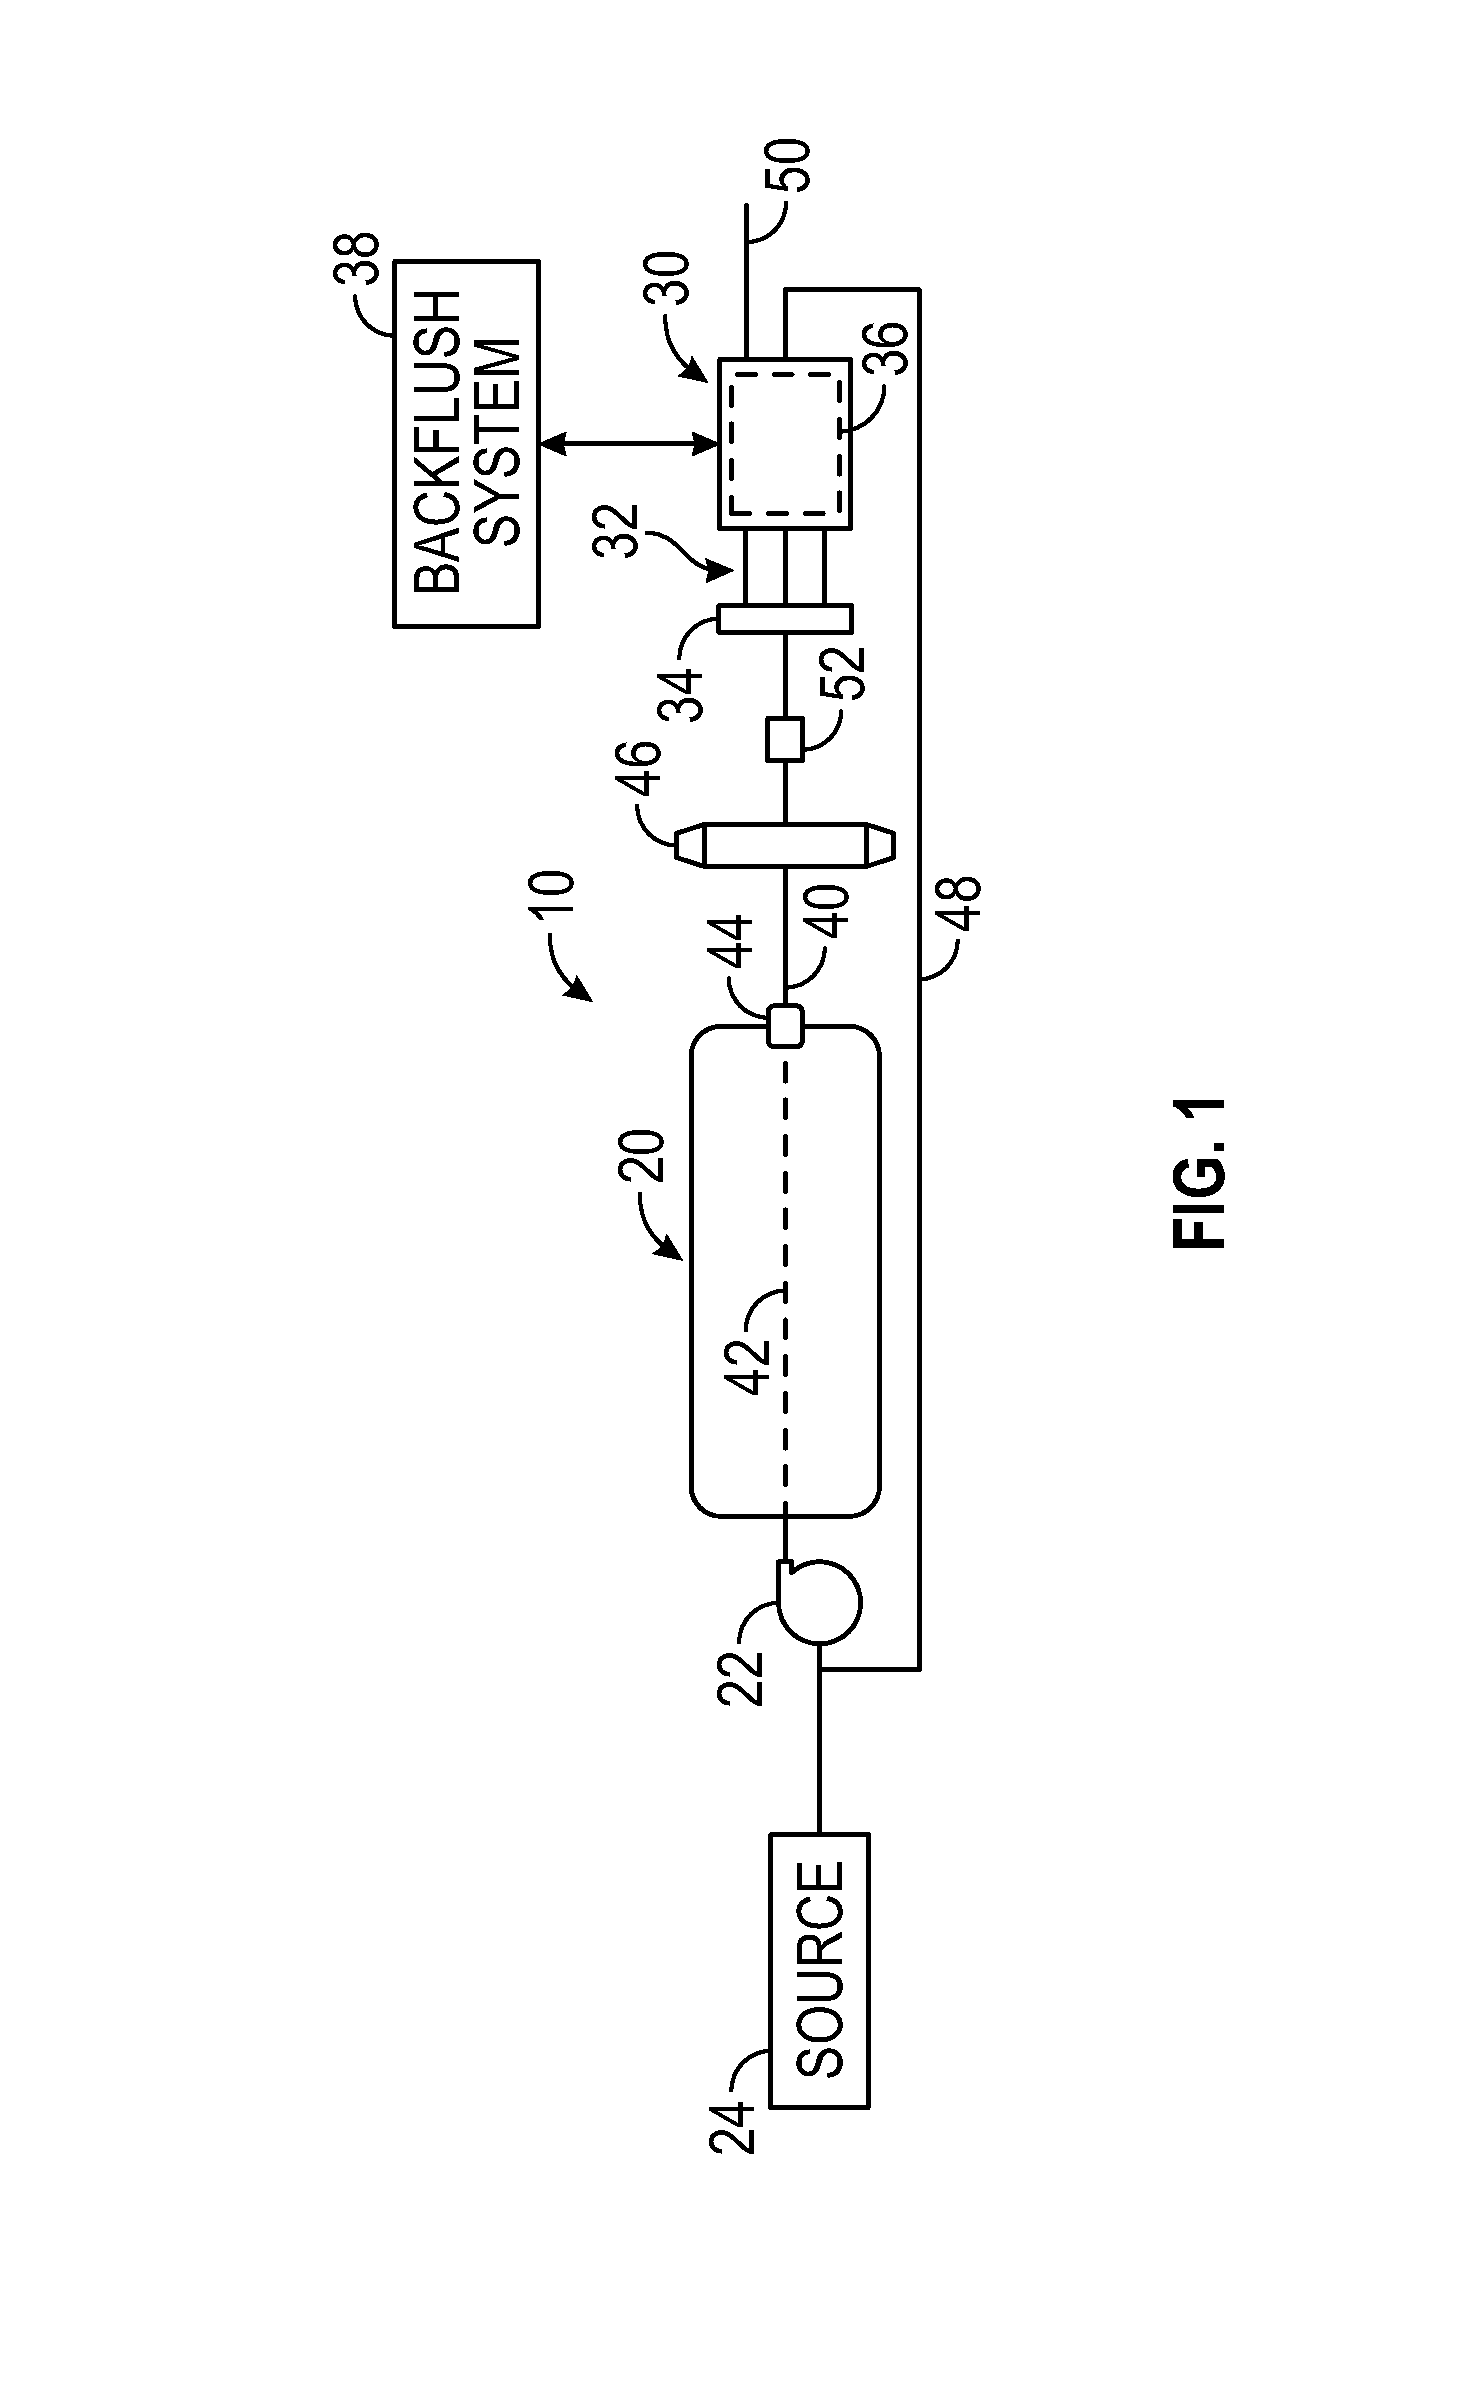 Systems and methods for filtering metals from fluids